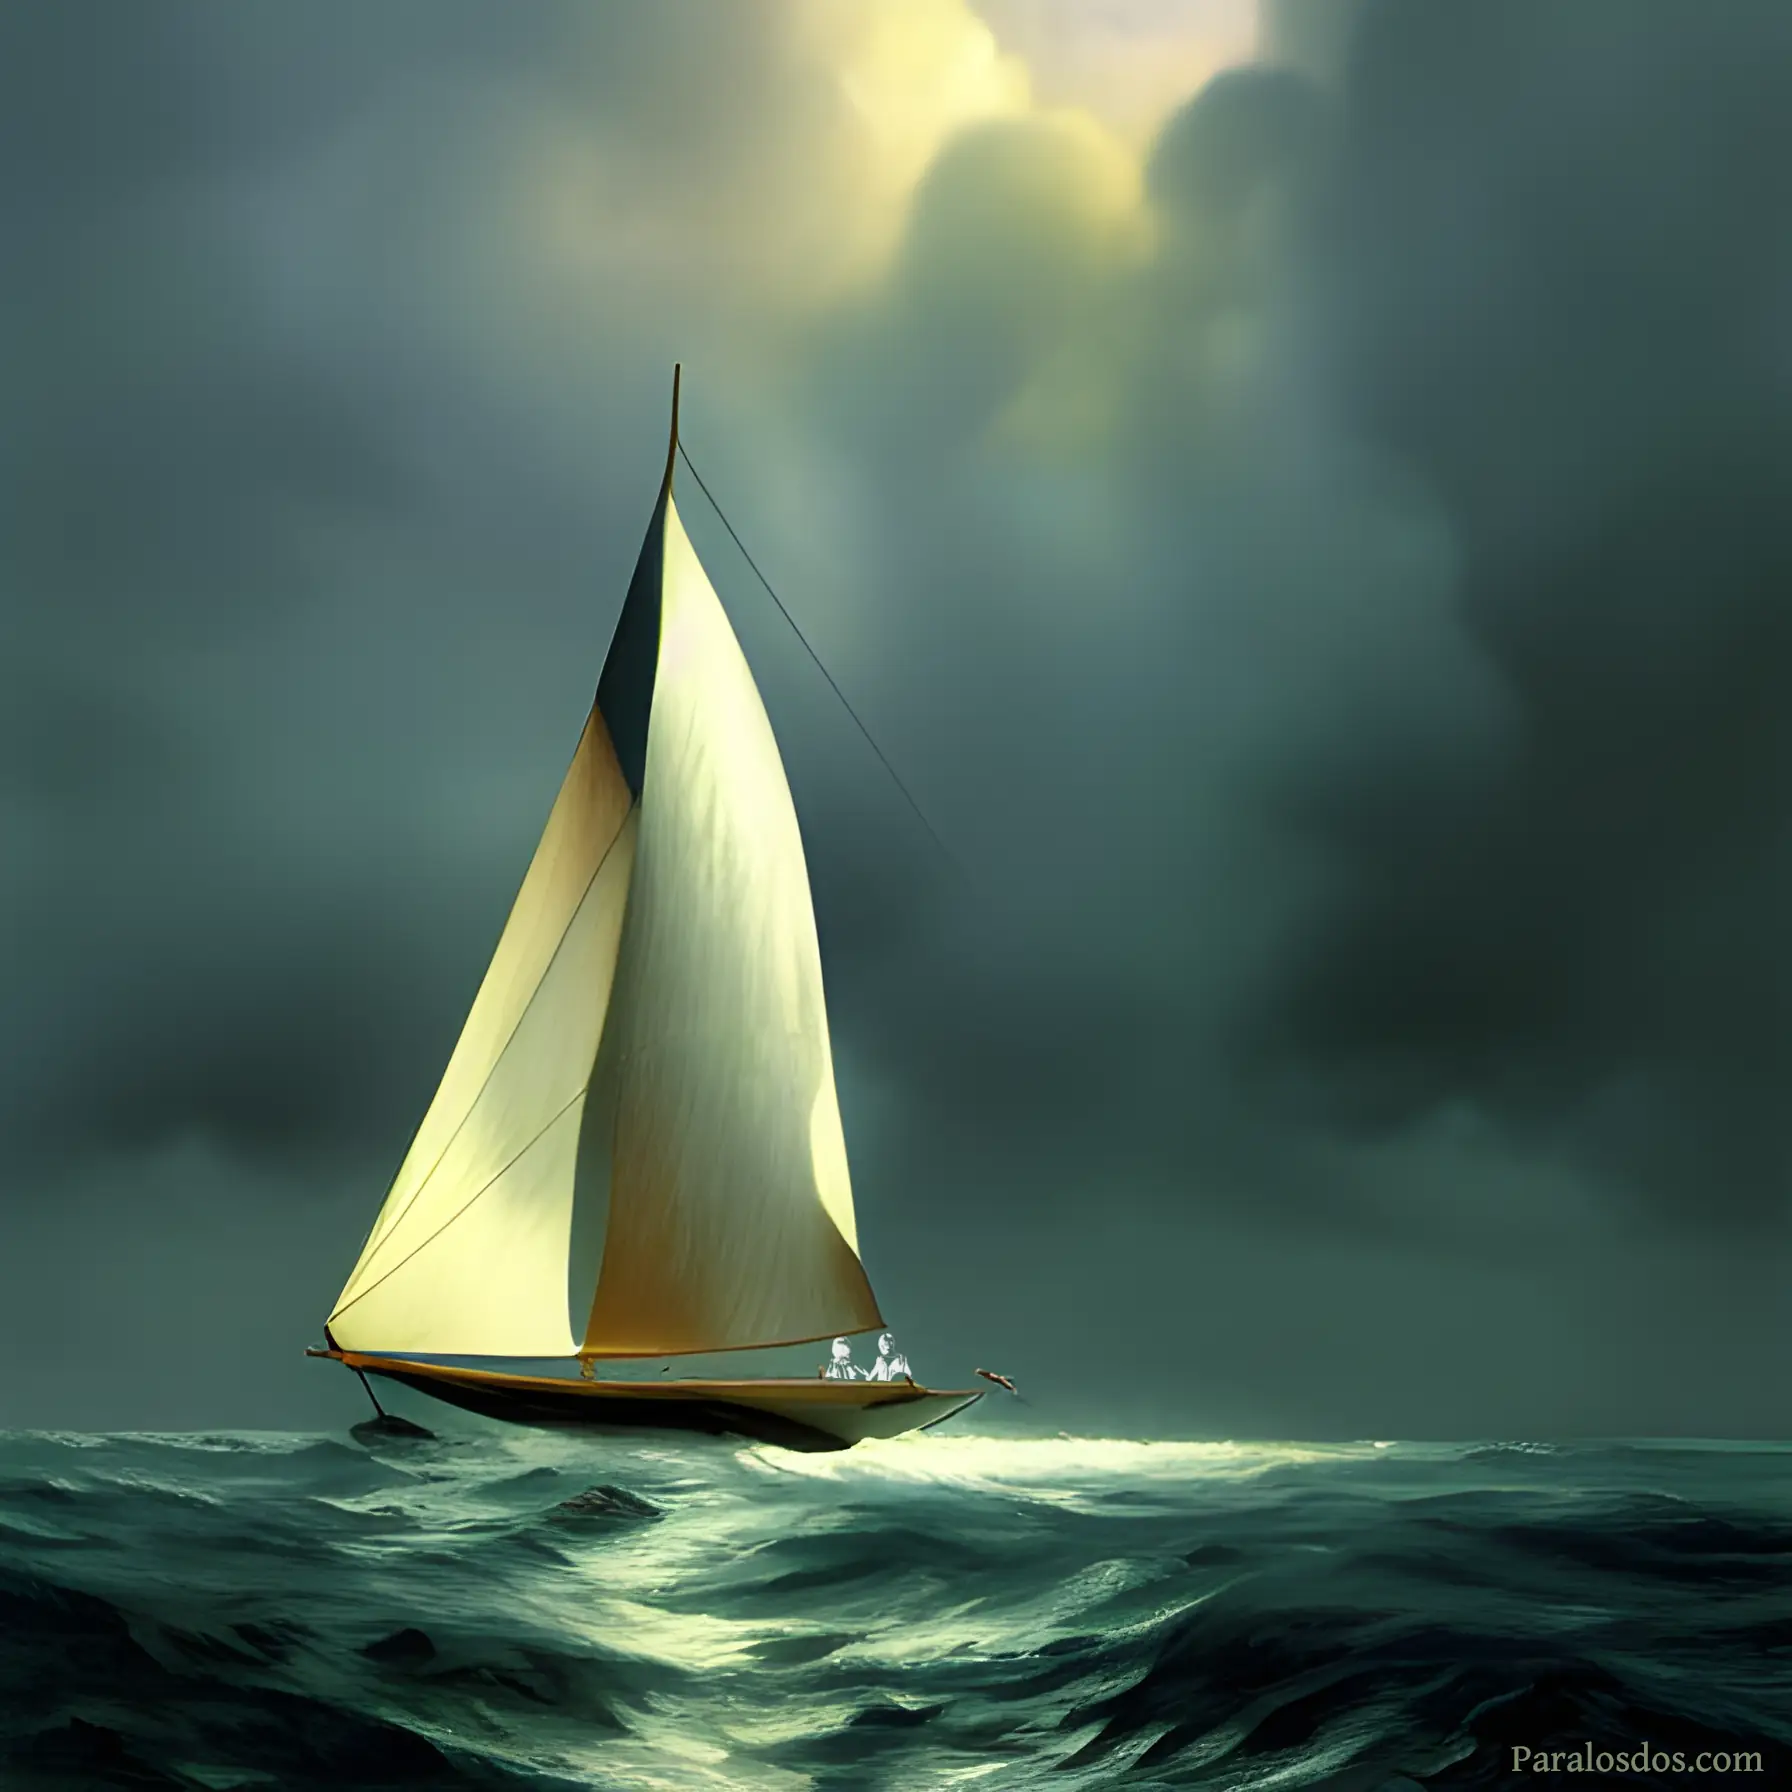 An artistic rendering of a small sailboat on rough water.